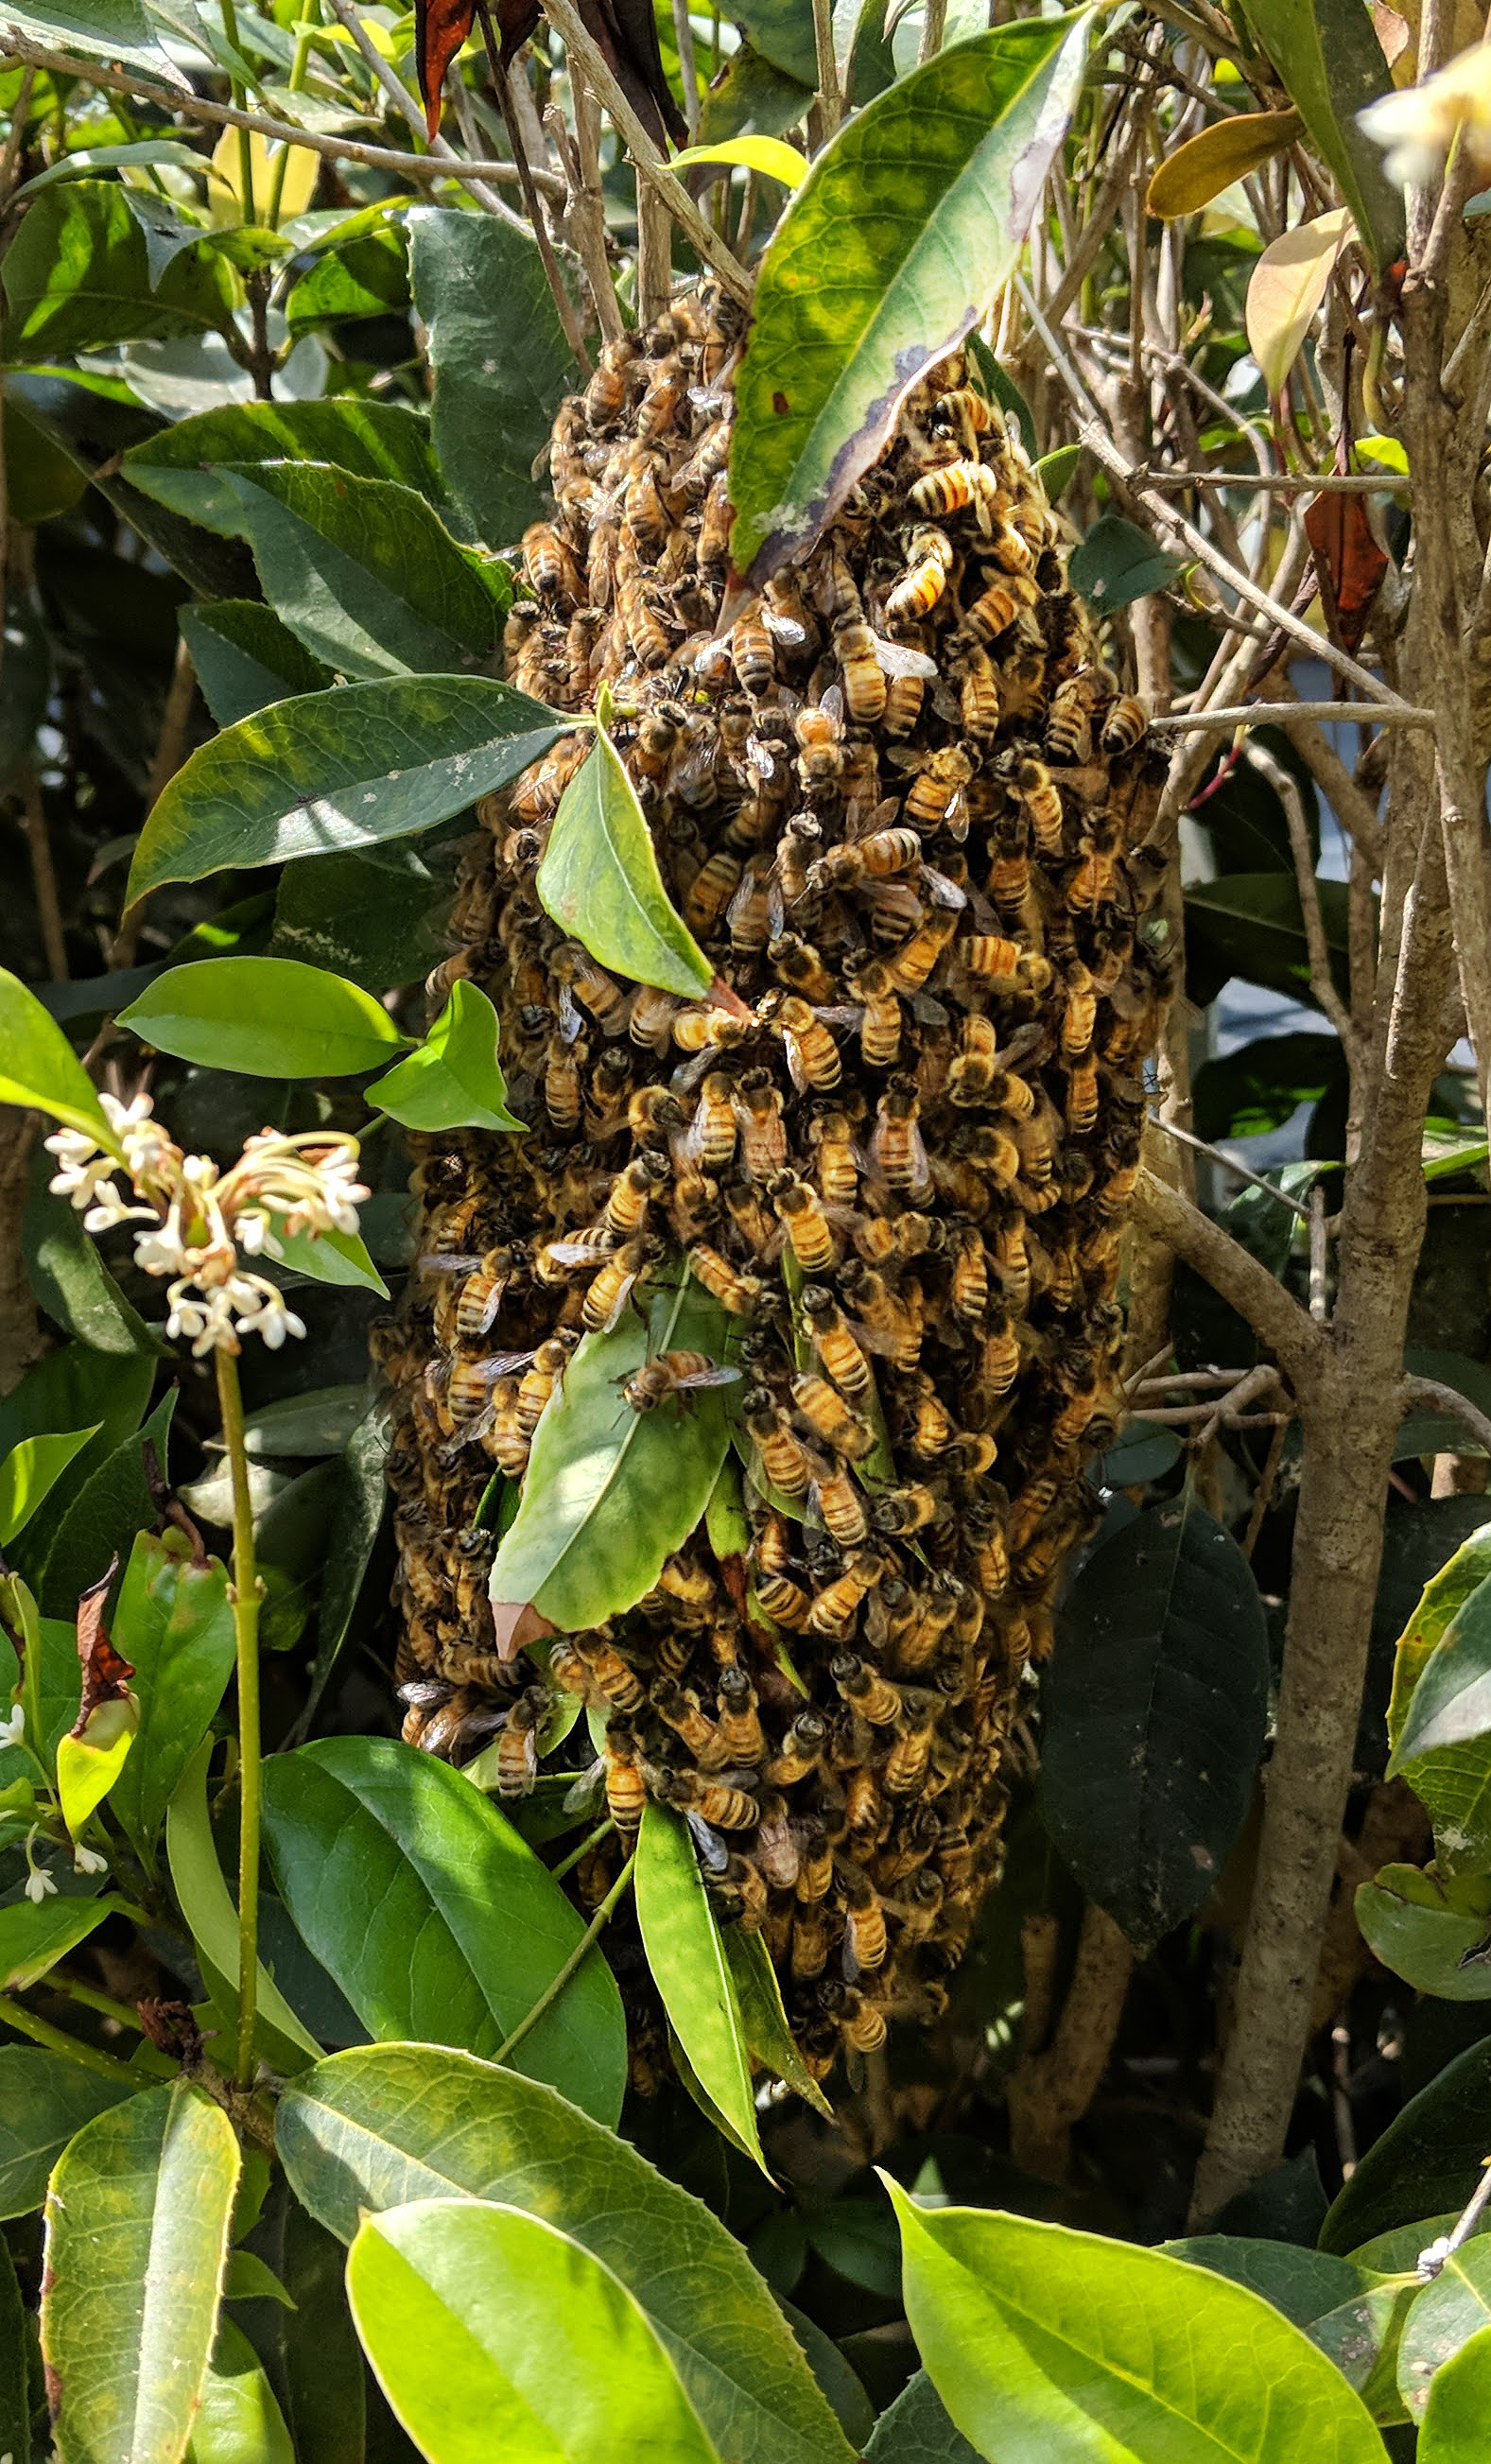  Bees will build their hive anywhere but like to be off the ground since they can drown